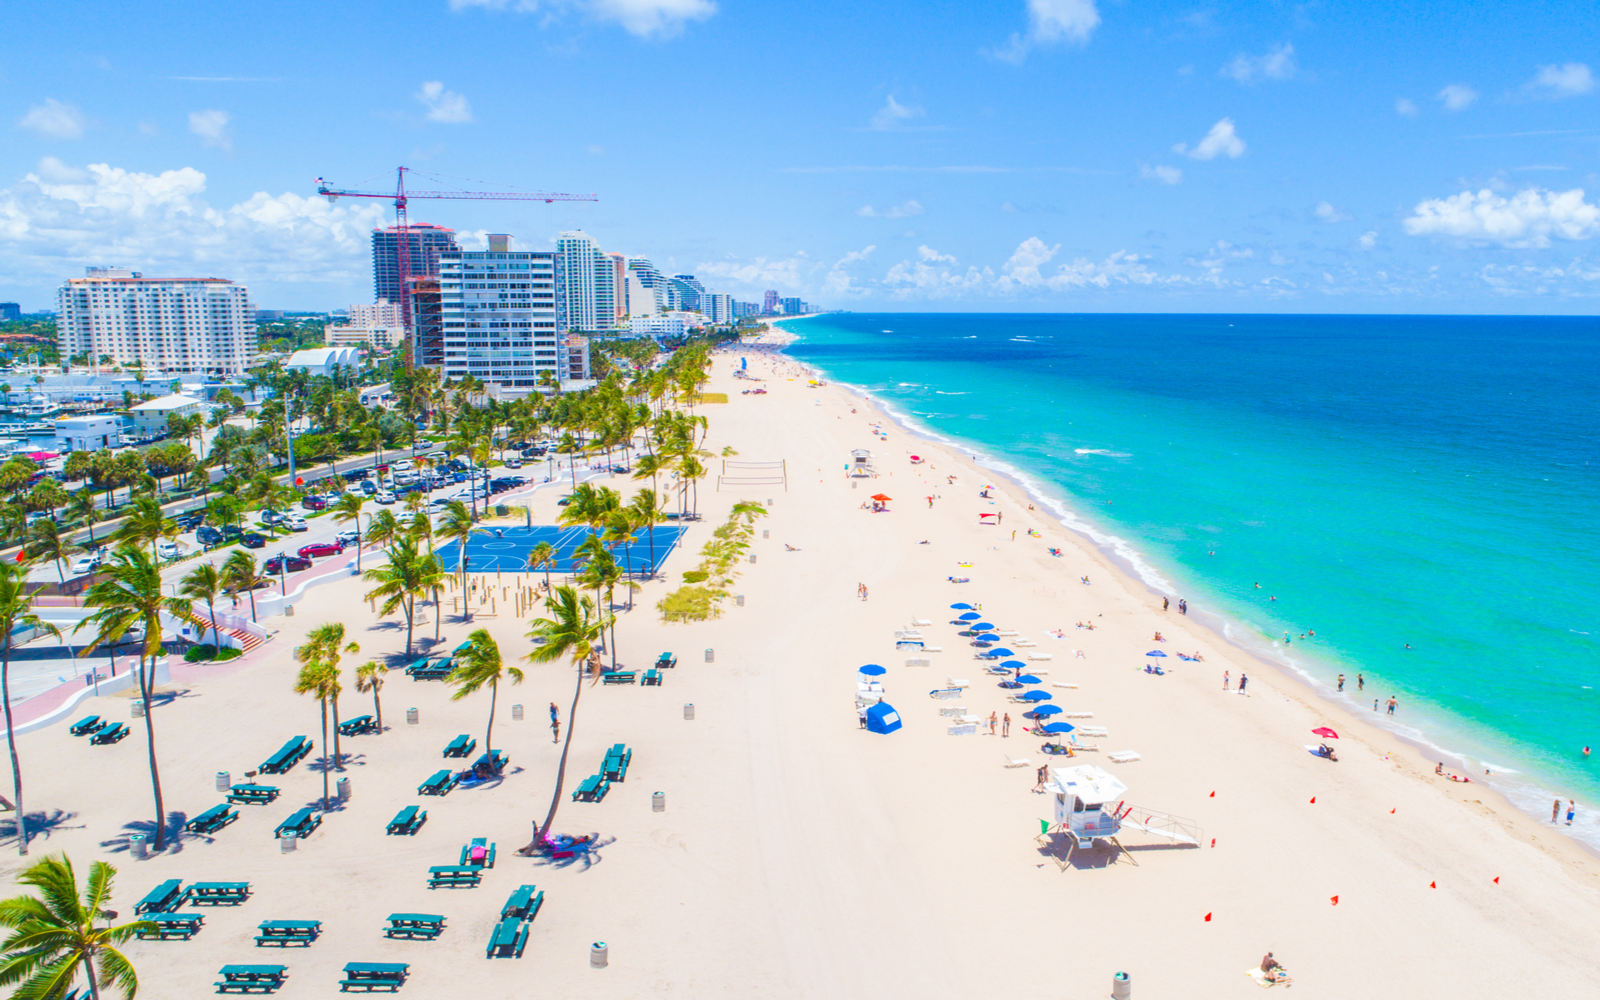 22 Best Things to Do in Fort Lauderdale in 2023